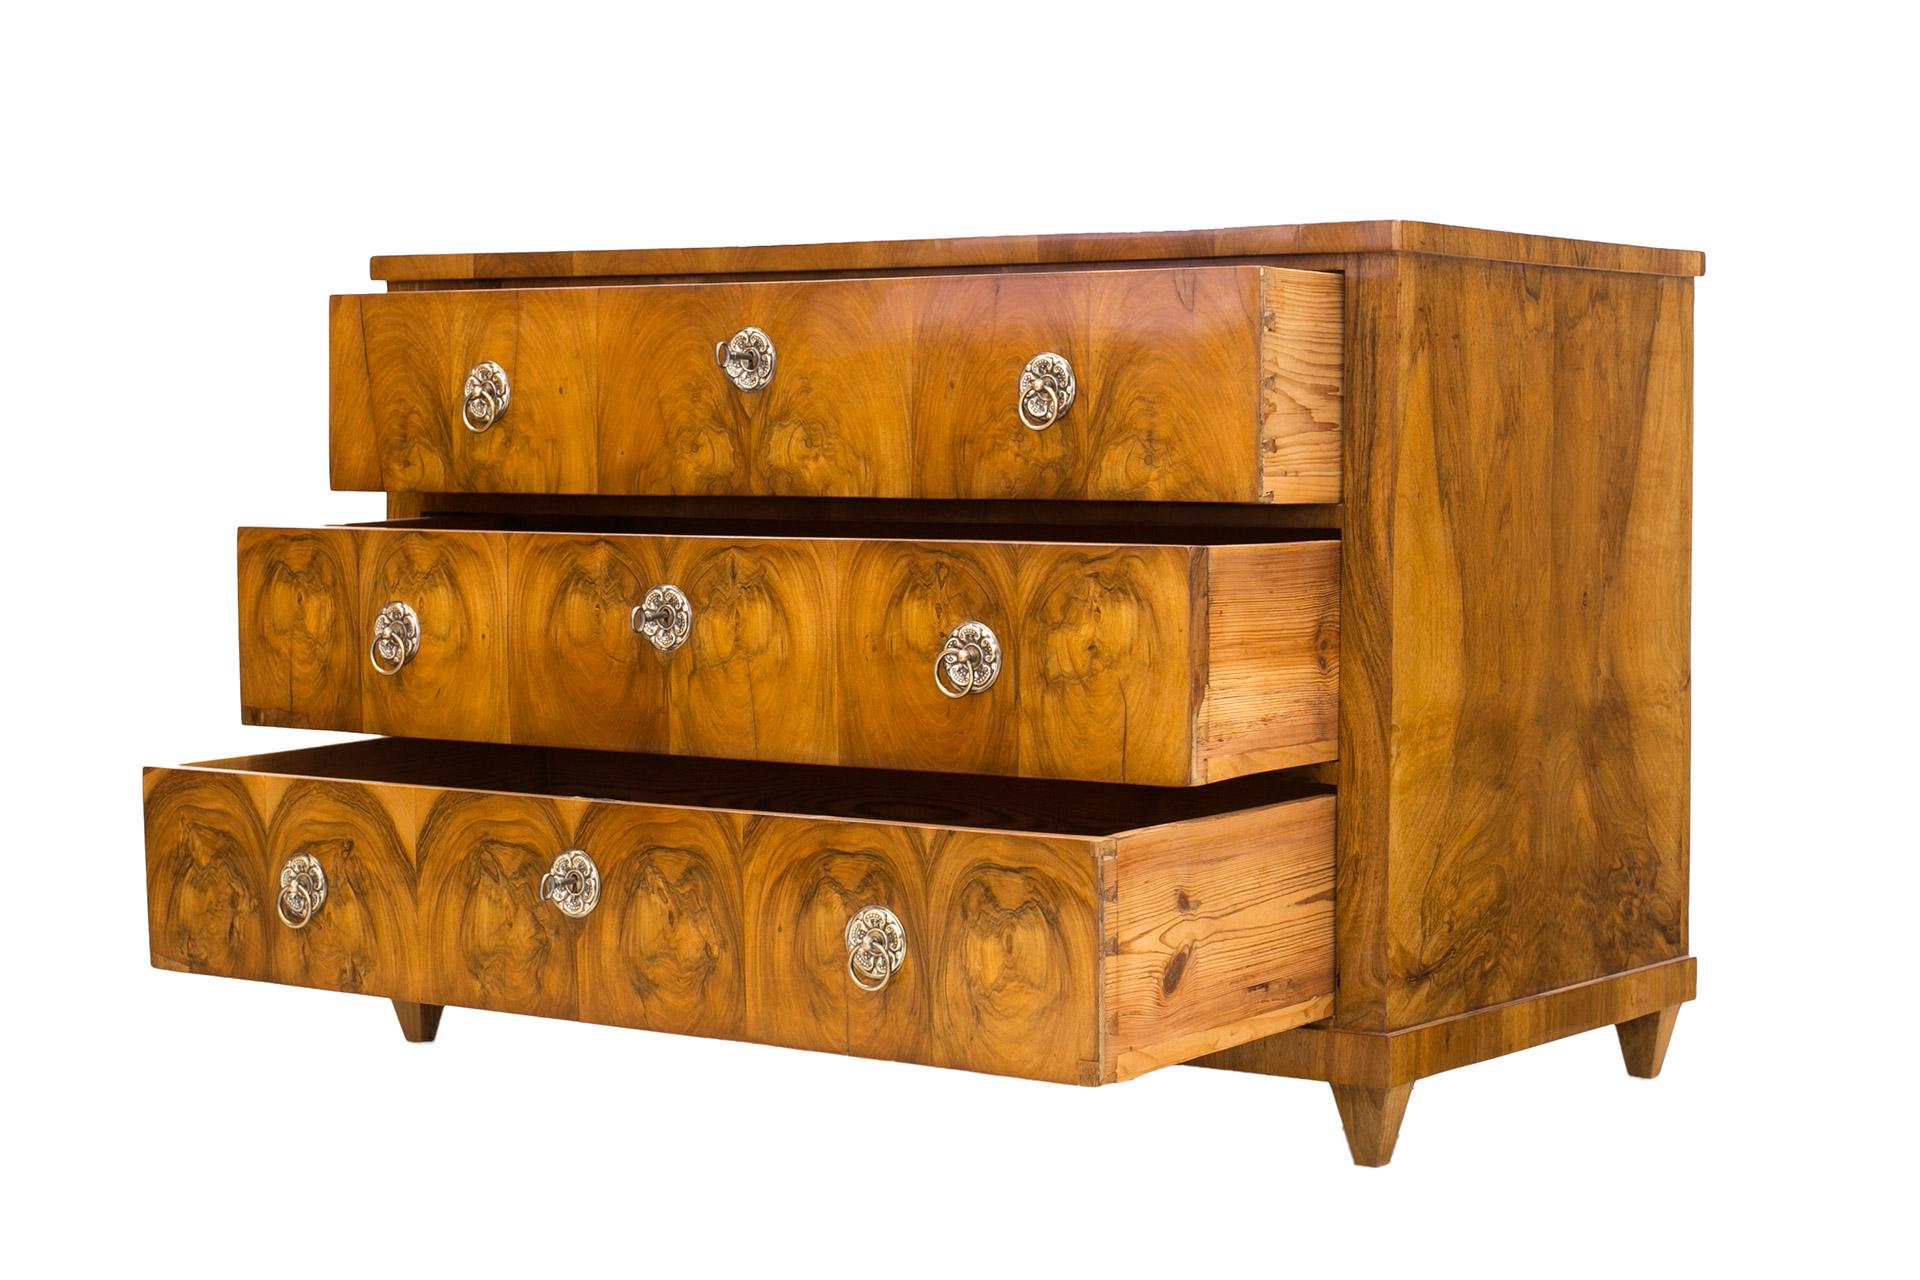 This is an original three-drawer chest of drawers from the Biedermeier period. It was made, circa 1830-1835 in Germany. The piece is made of coniferous wood, veneered with walnut wood. Finished with shellac varnish, hand-applied high-gloss tampon